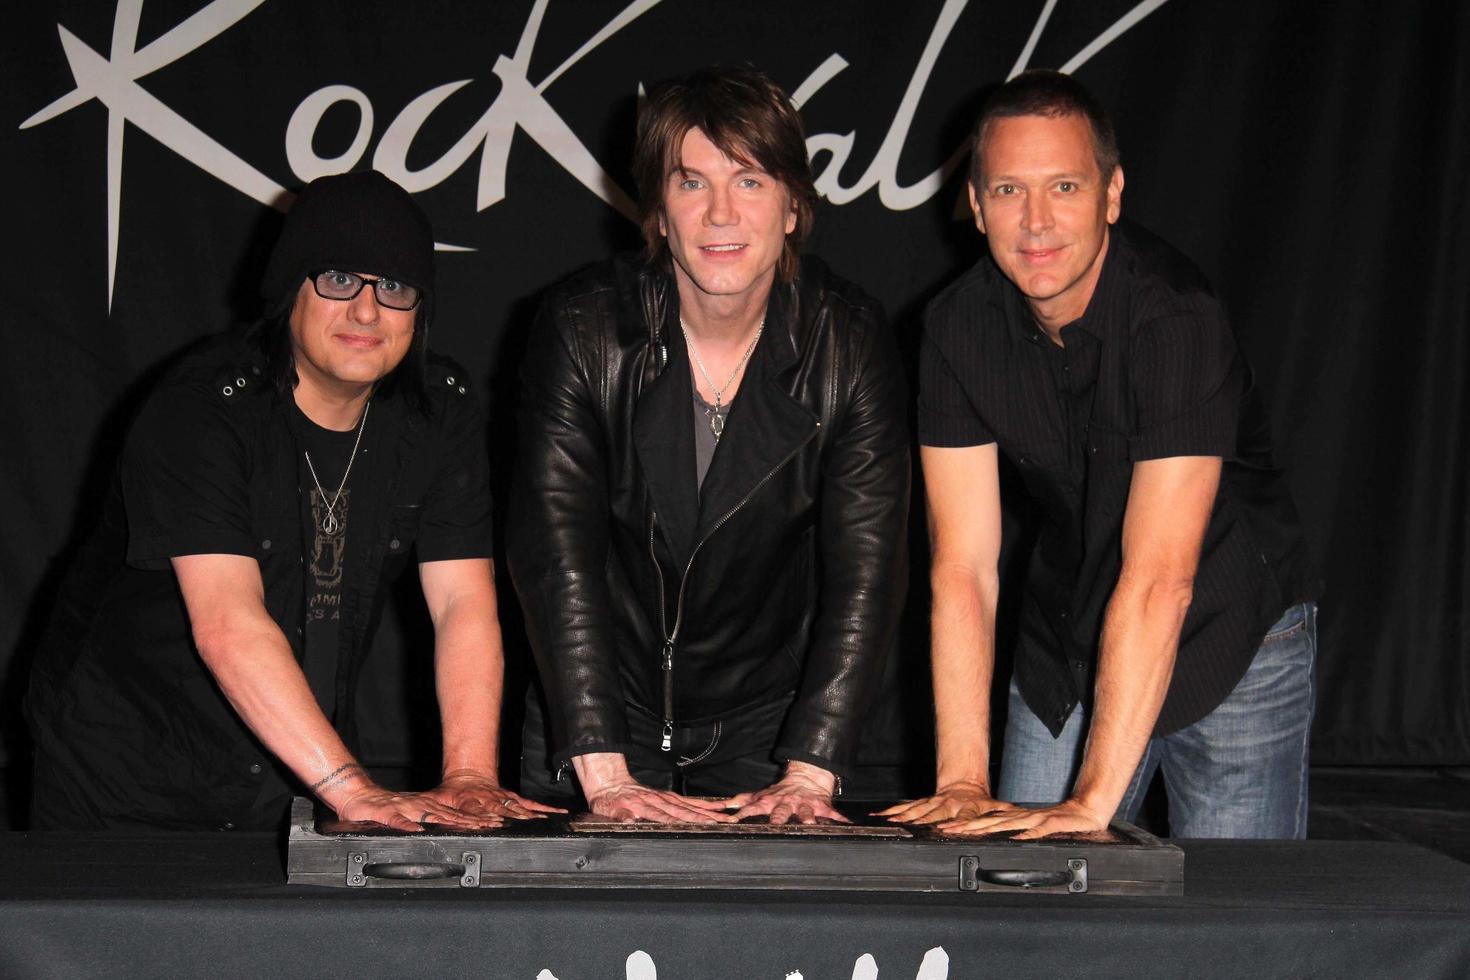 LOS ANGELES, MAY 7 -  Robby Takac, John Rzeznik, Mike Malinin at the Goo Goo Dolls RockWalk Induction at the Paley Center For Media on May 7, 2013 in Beverly Hills, CA photo